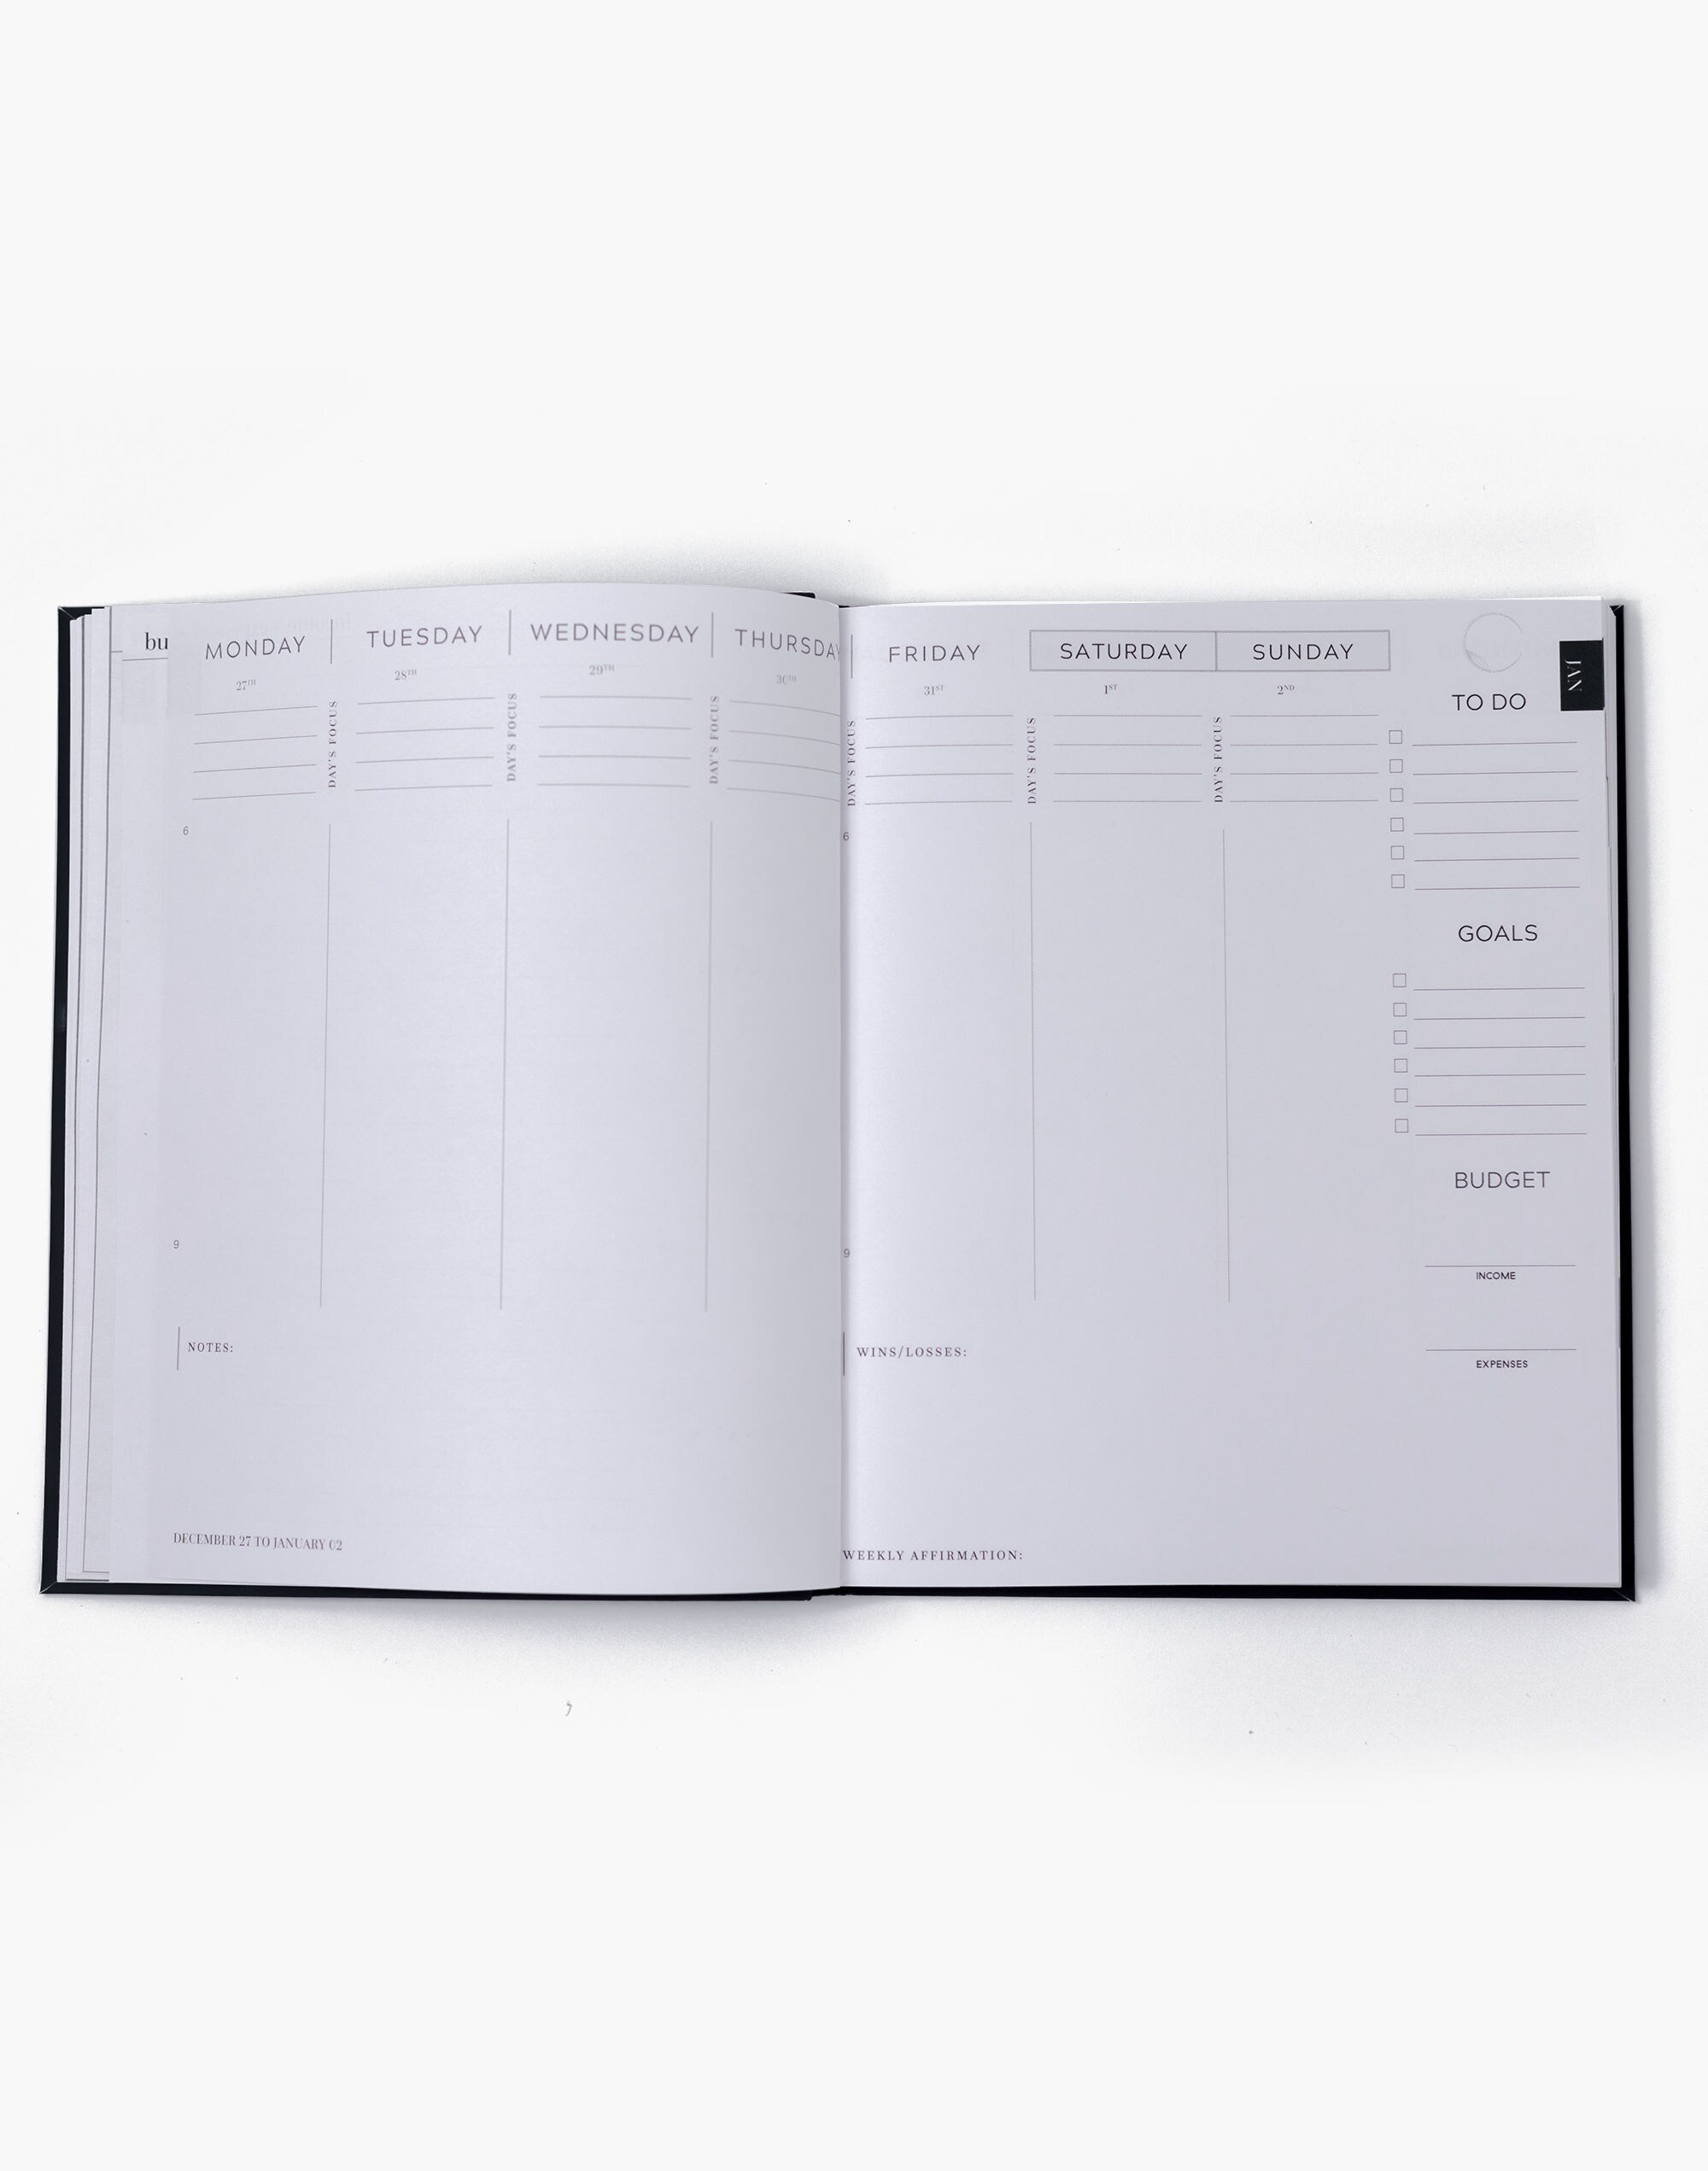 alter planning co. The 2022 Annual Planner